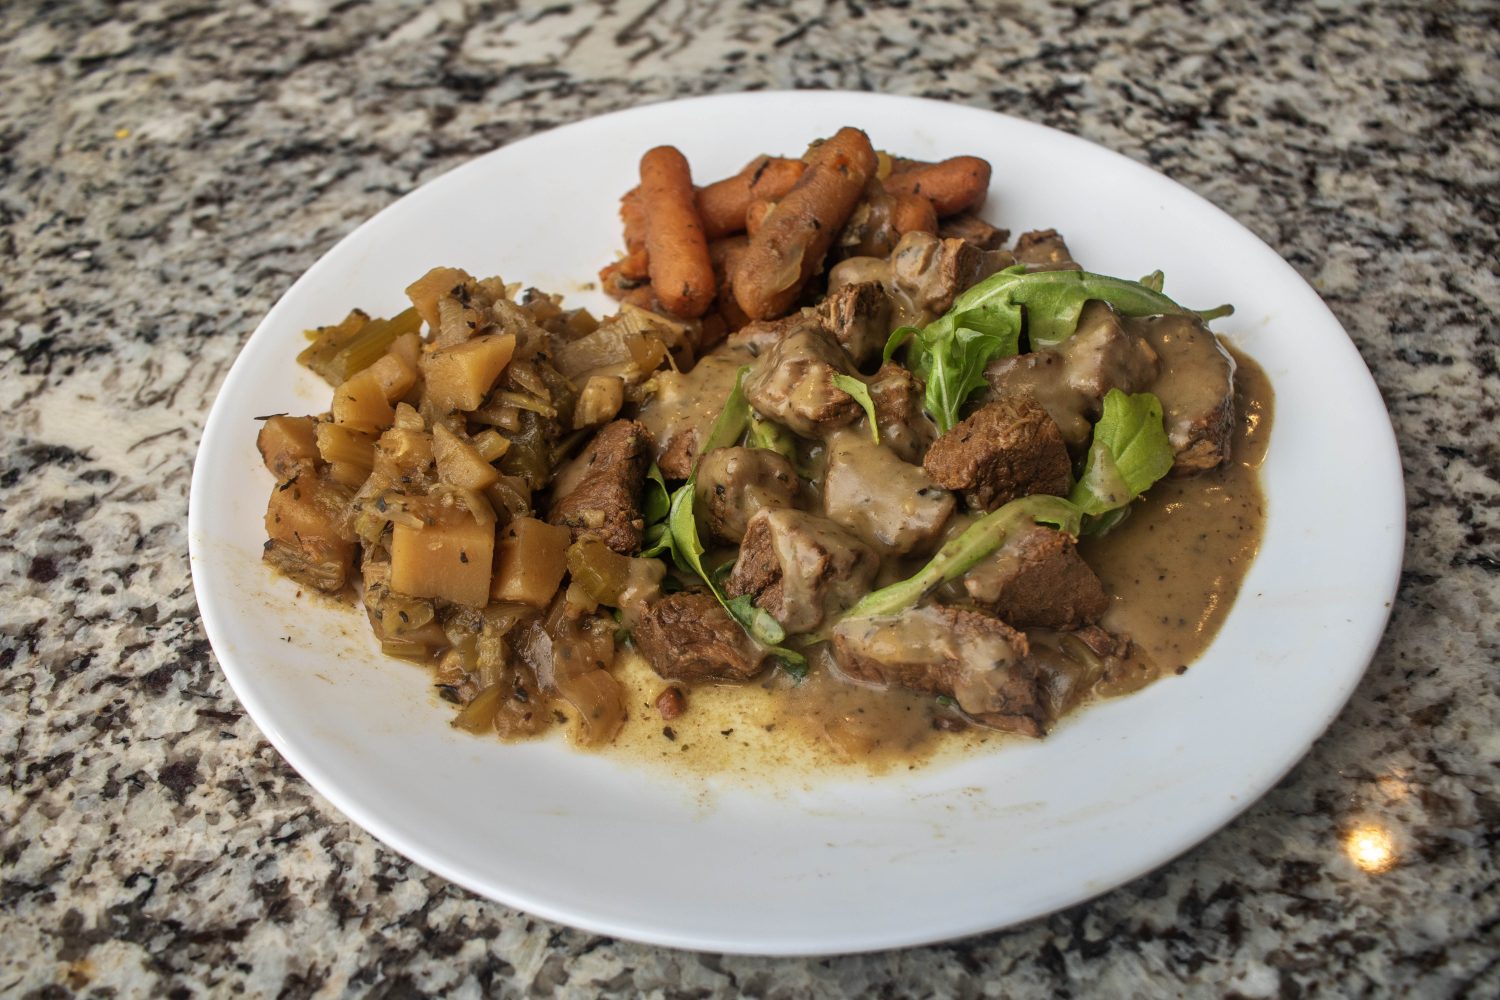 The final product: stewed beef and arugula, covered in gravy, with potatoes, parsnips, and carrots on the side.